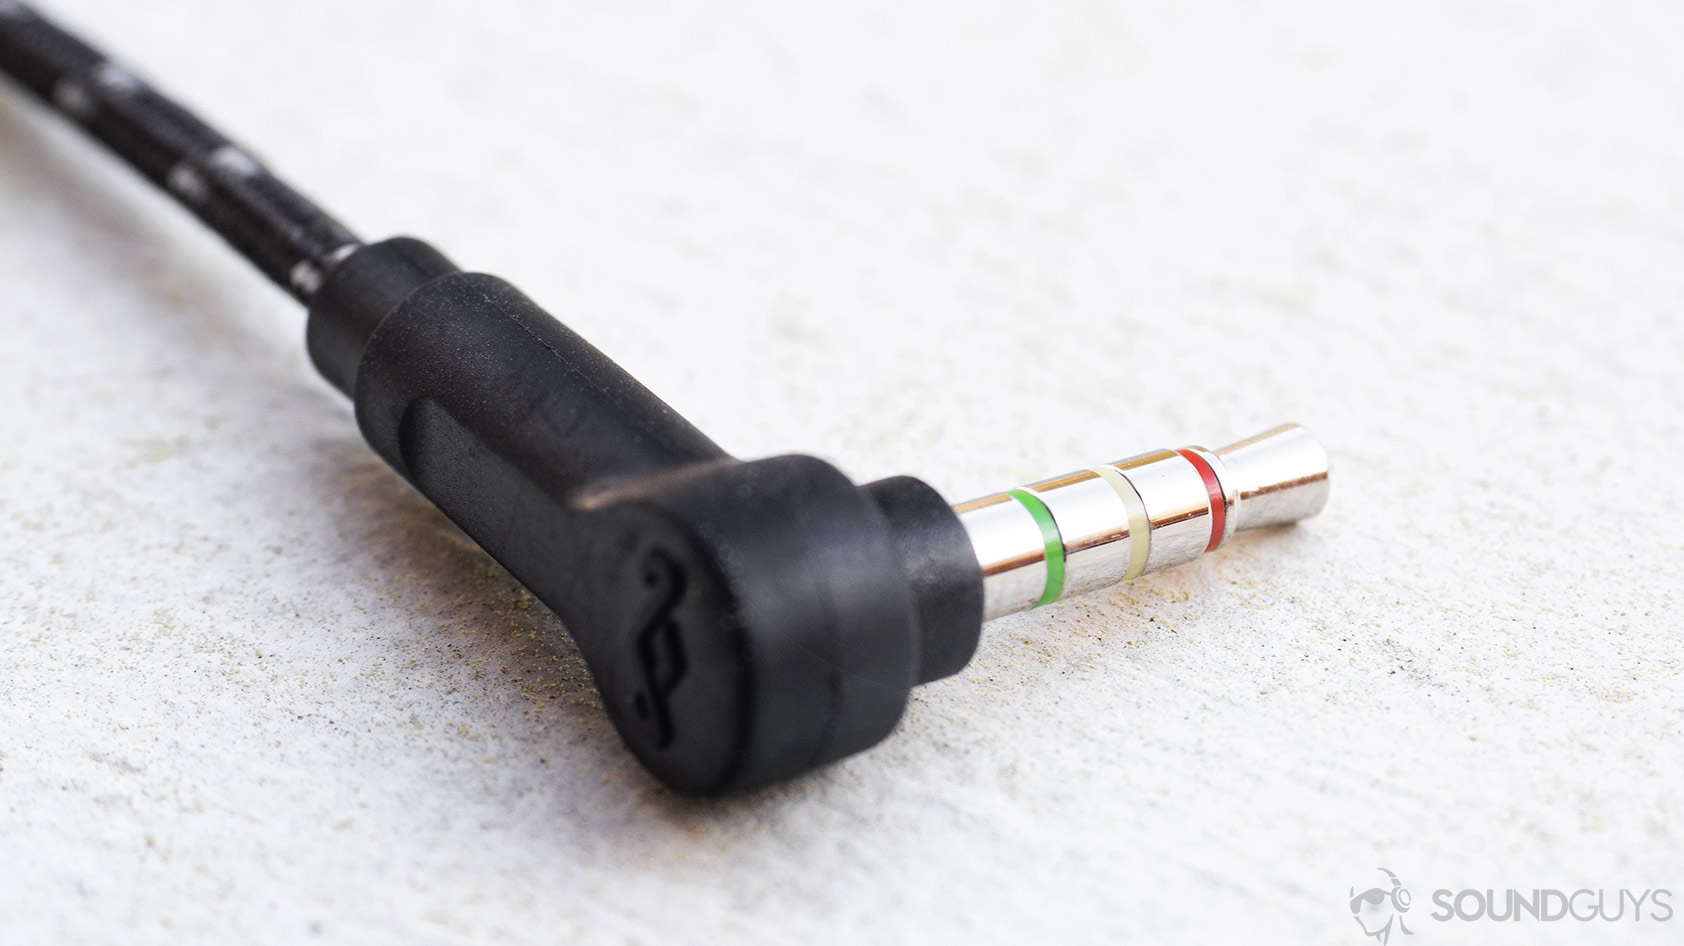 House of Marley Exodus: Close-up of the L-shaped 3.5mm headphone jack.